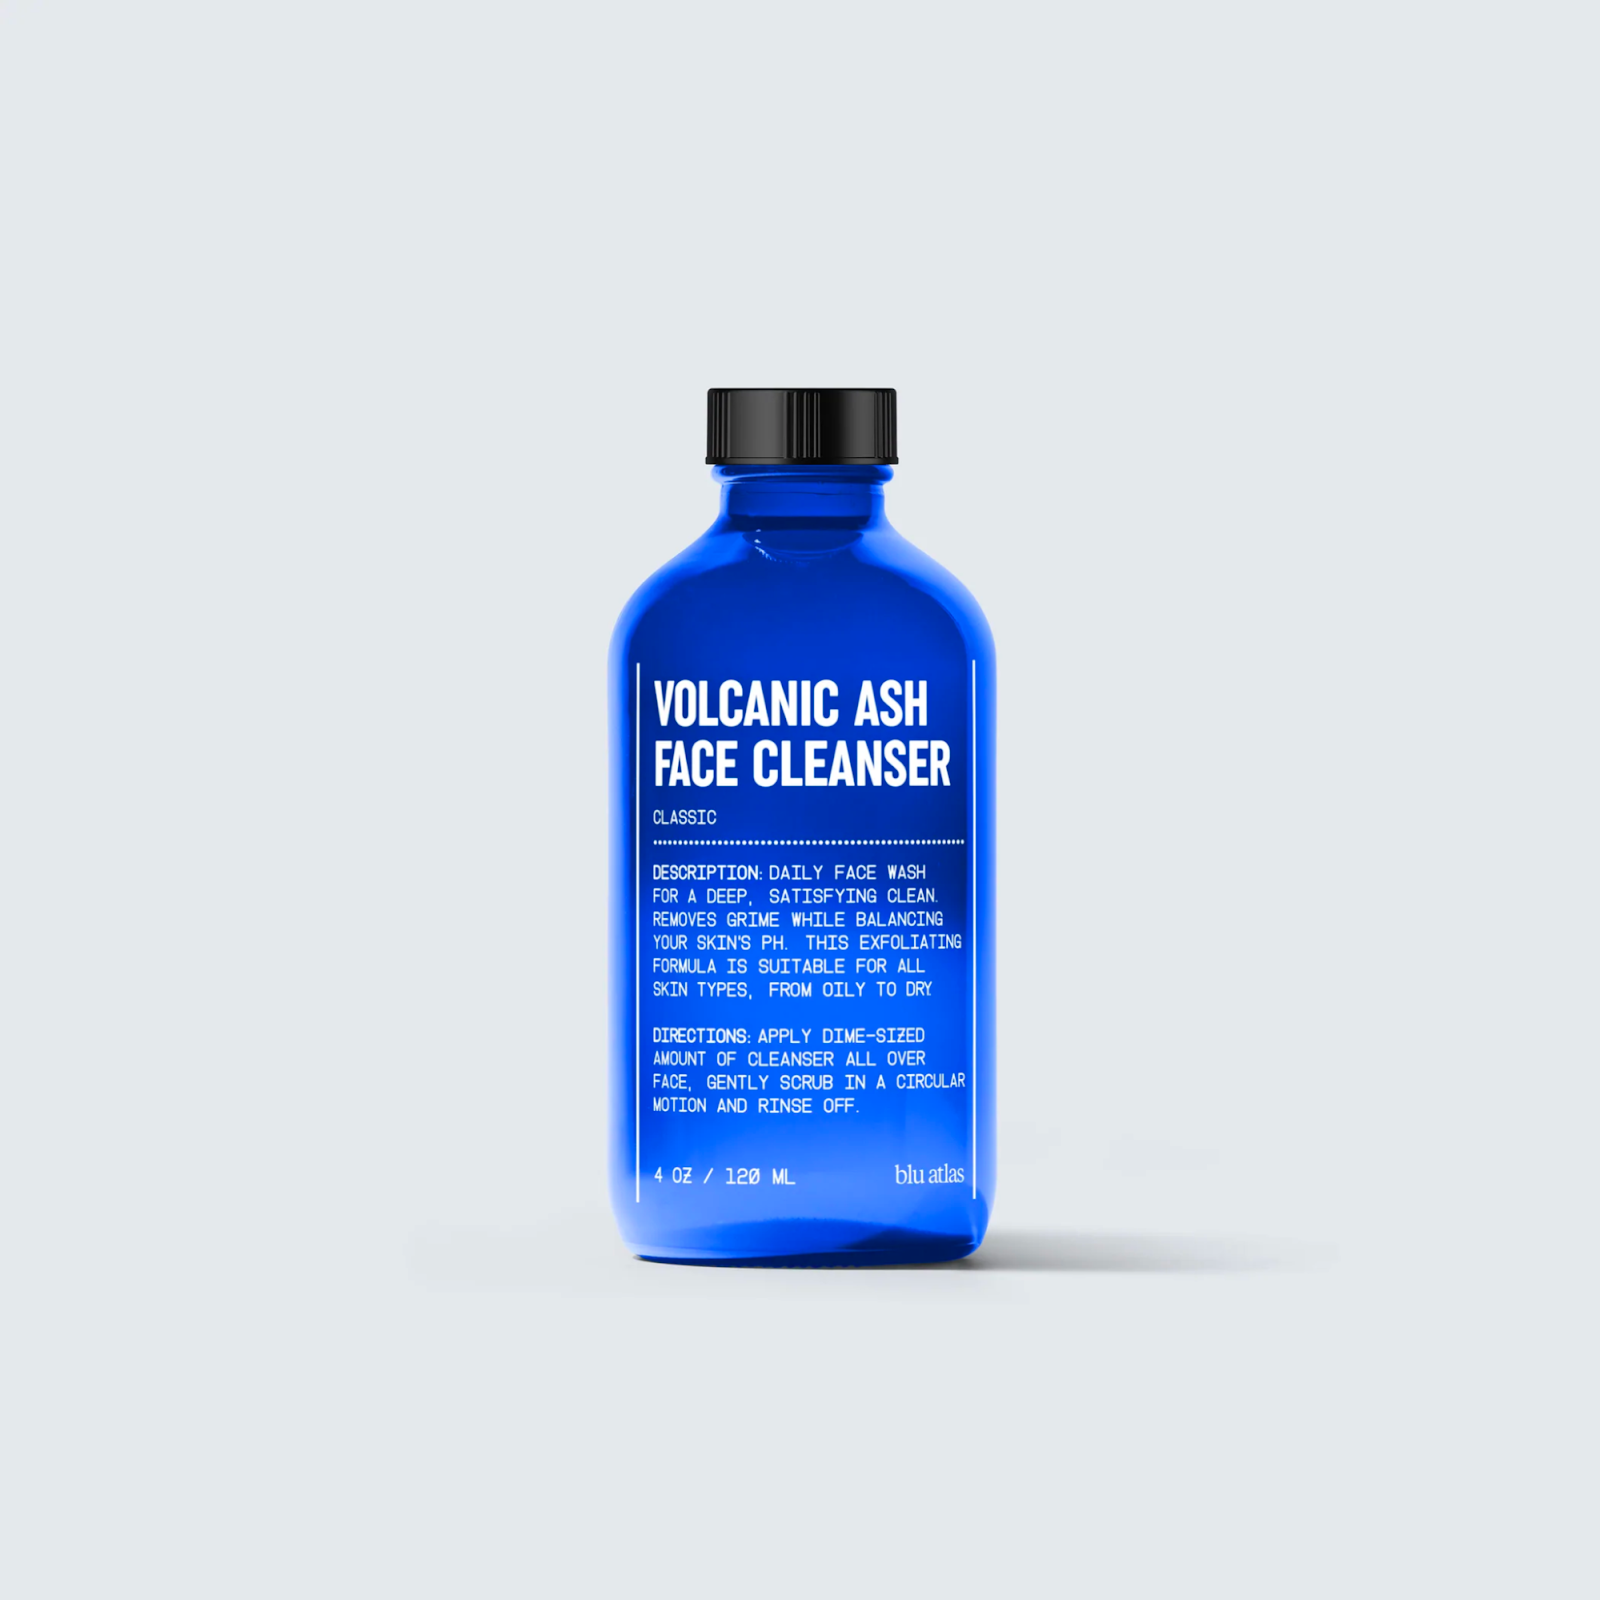 Facial Cleanser: Overview